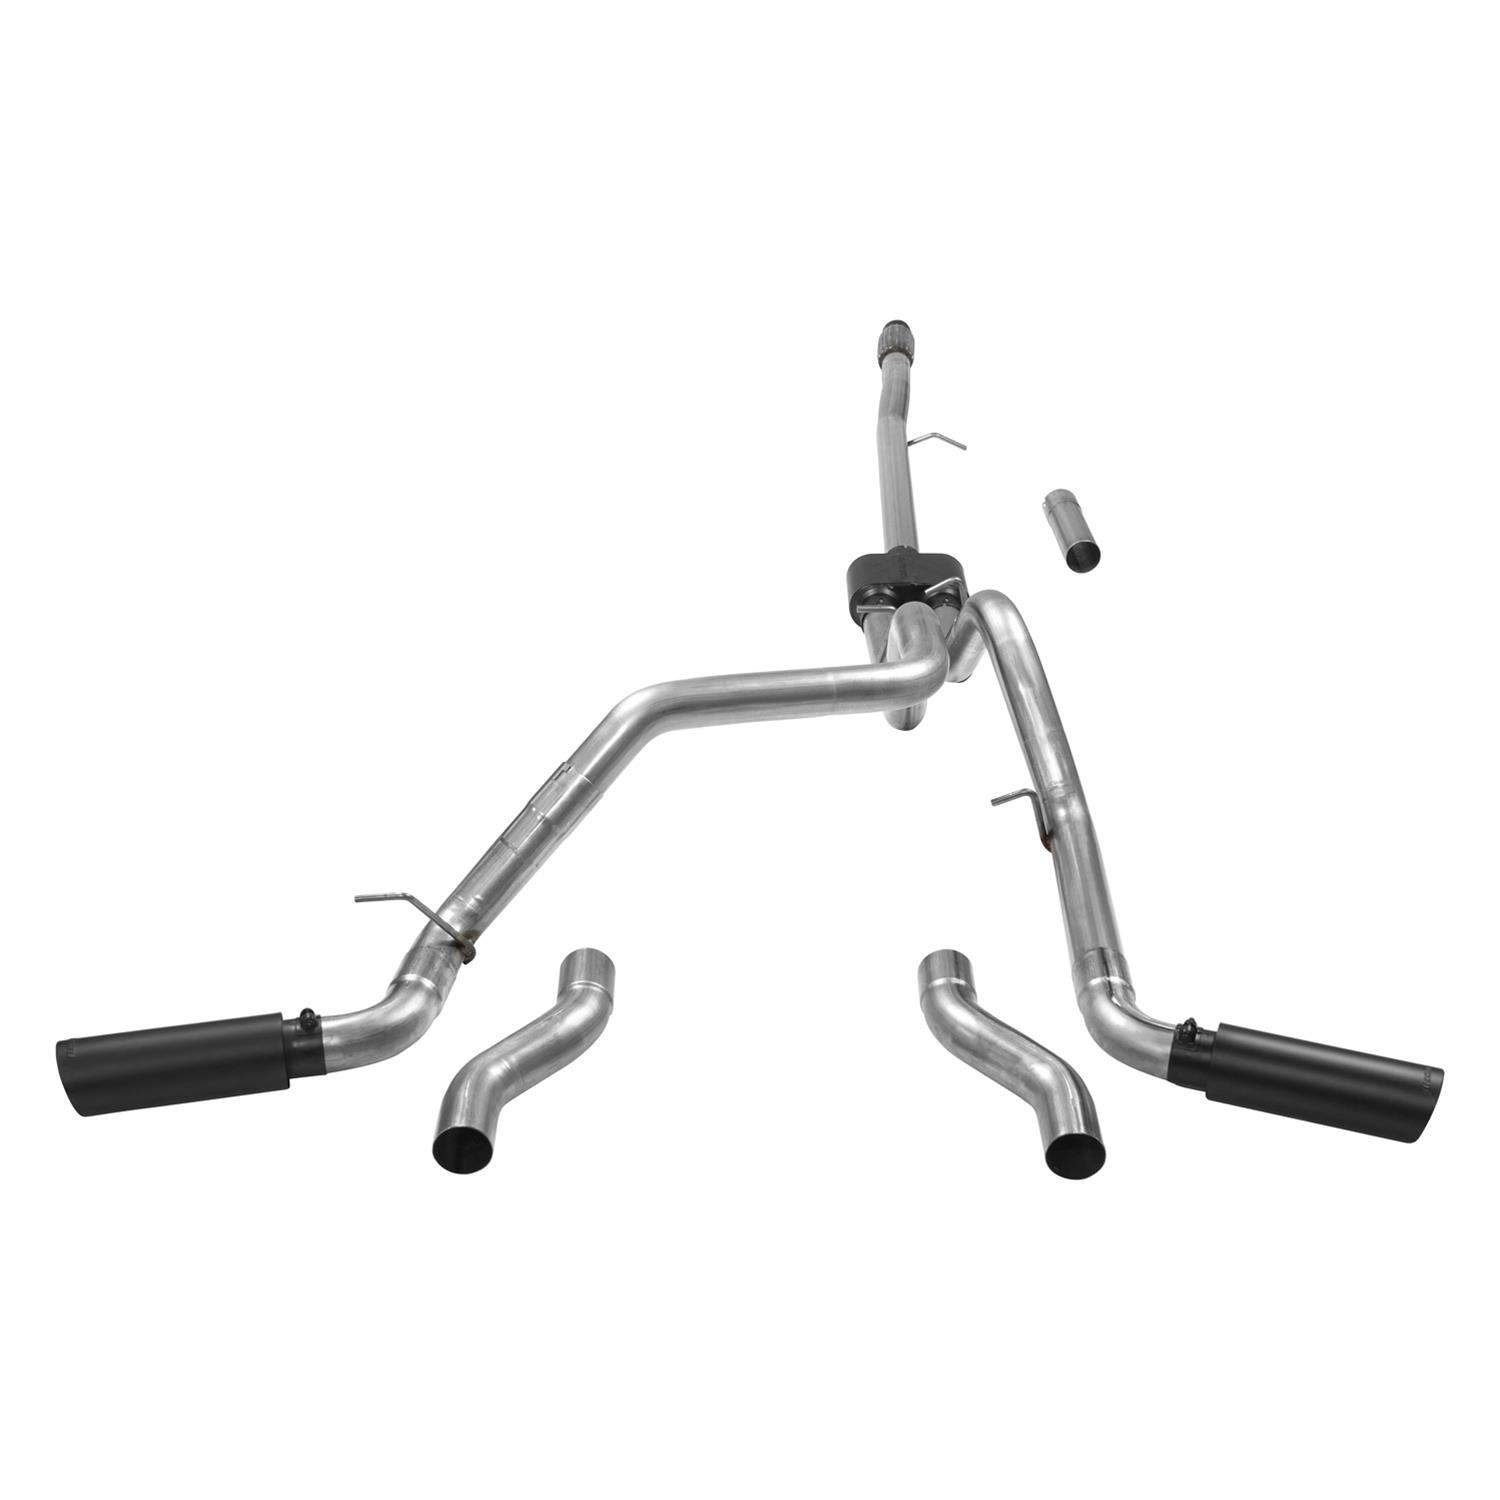 Flowmaster 817854 Flowmaster Outlaw Series Exhaust Systems Summit Racing